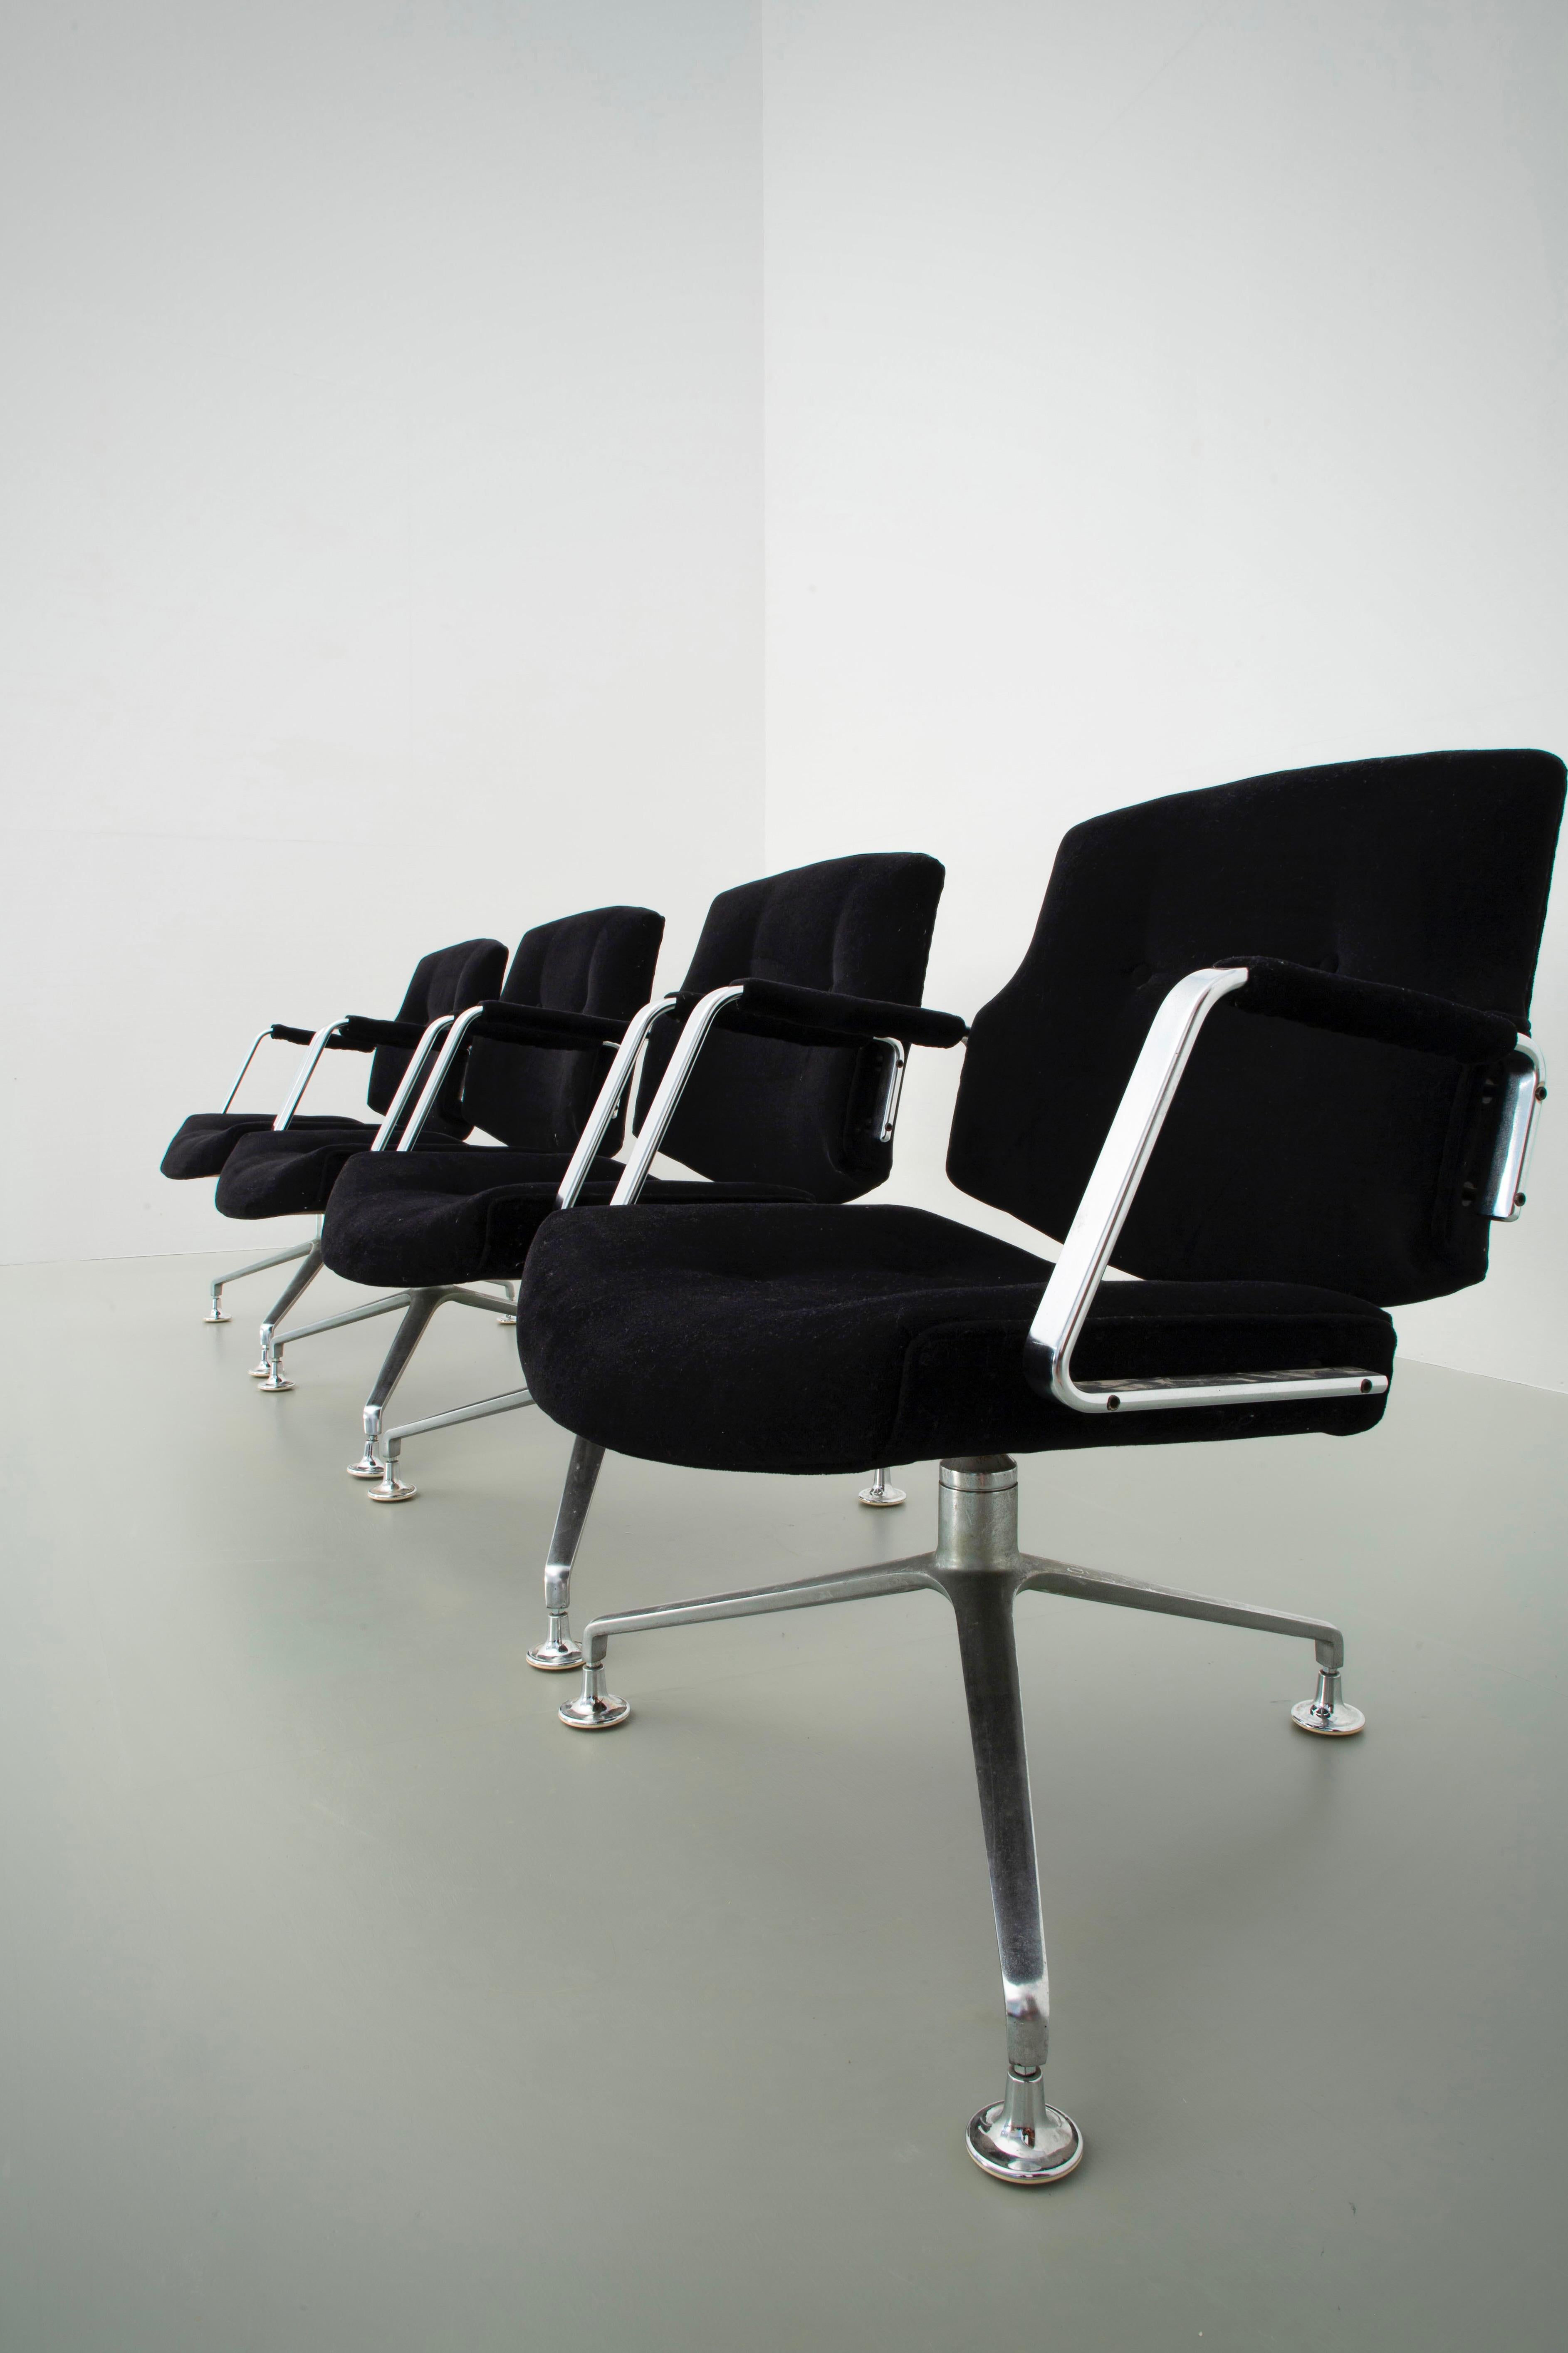 Mid-Century Modern Set of 4 FK 84 Armchairs by Fabricius and Kastholm for Kill Int., Denmark, 1962 For Sale